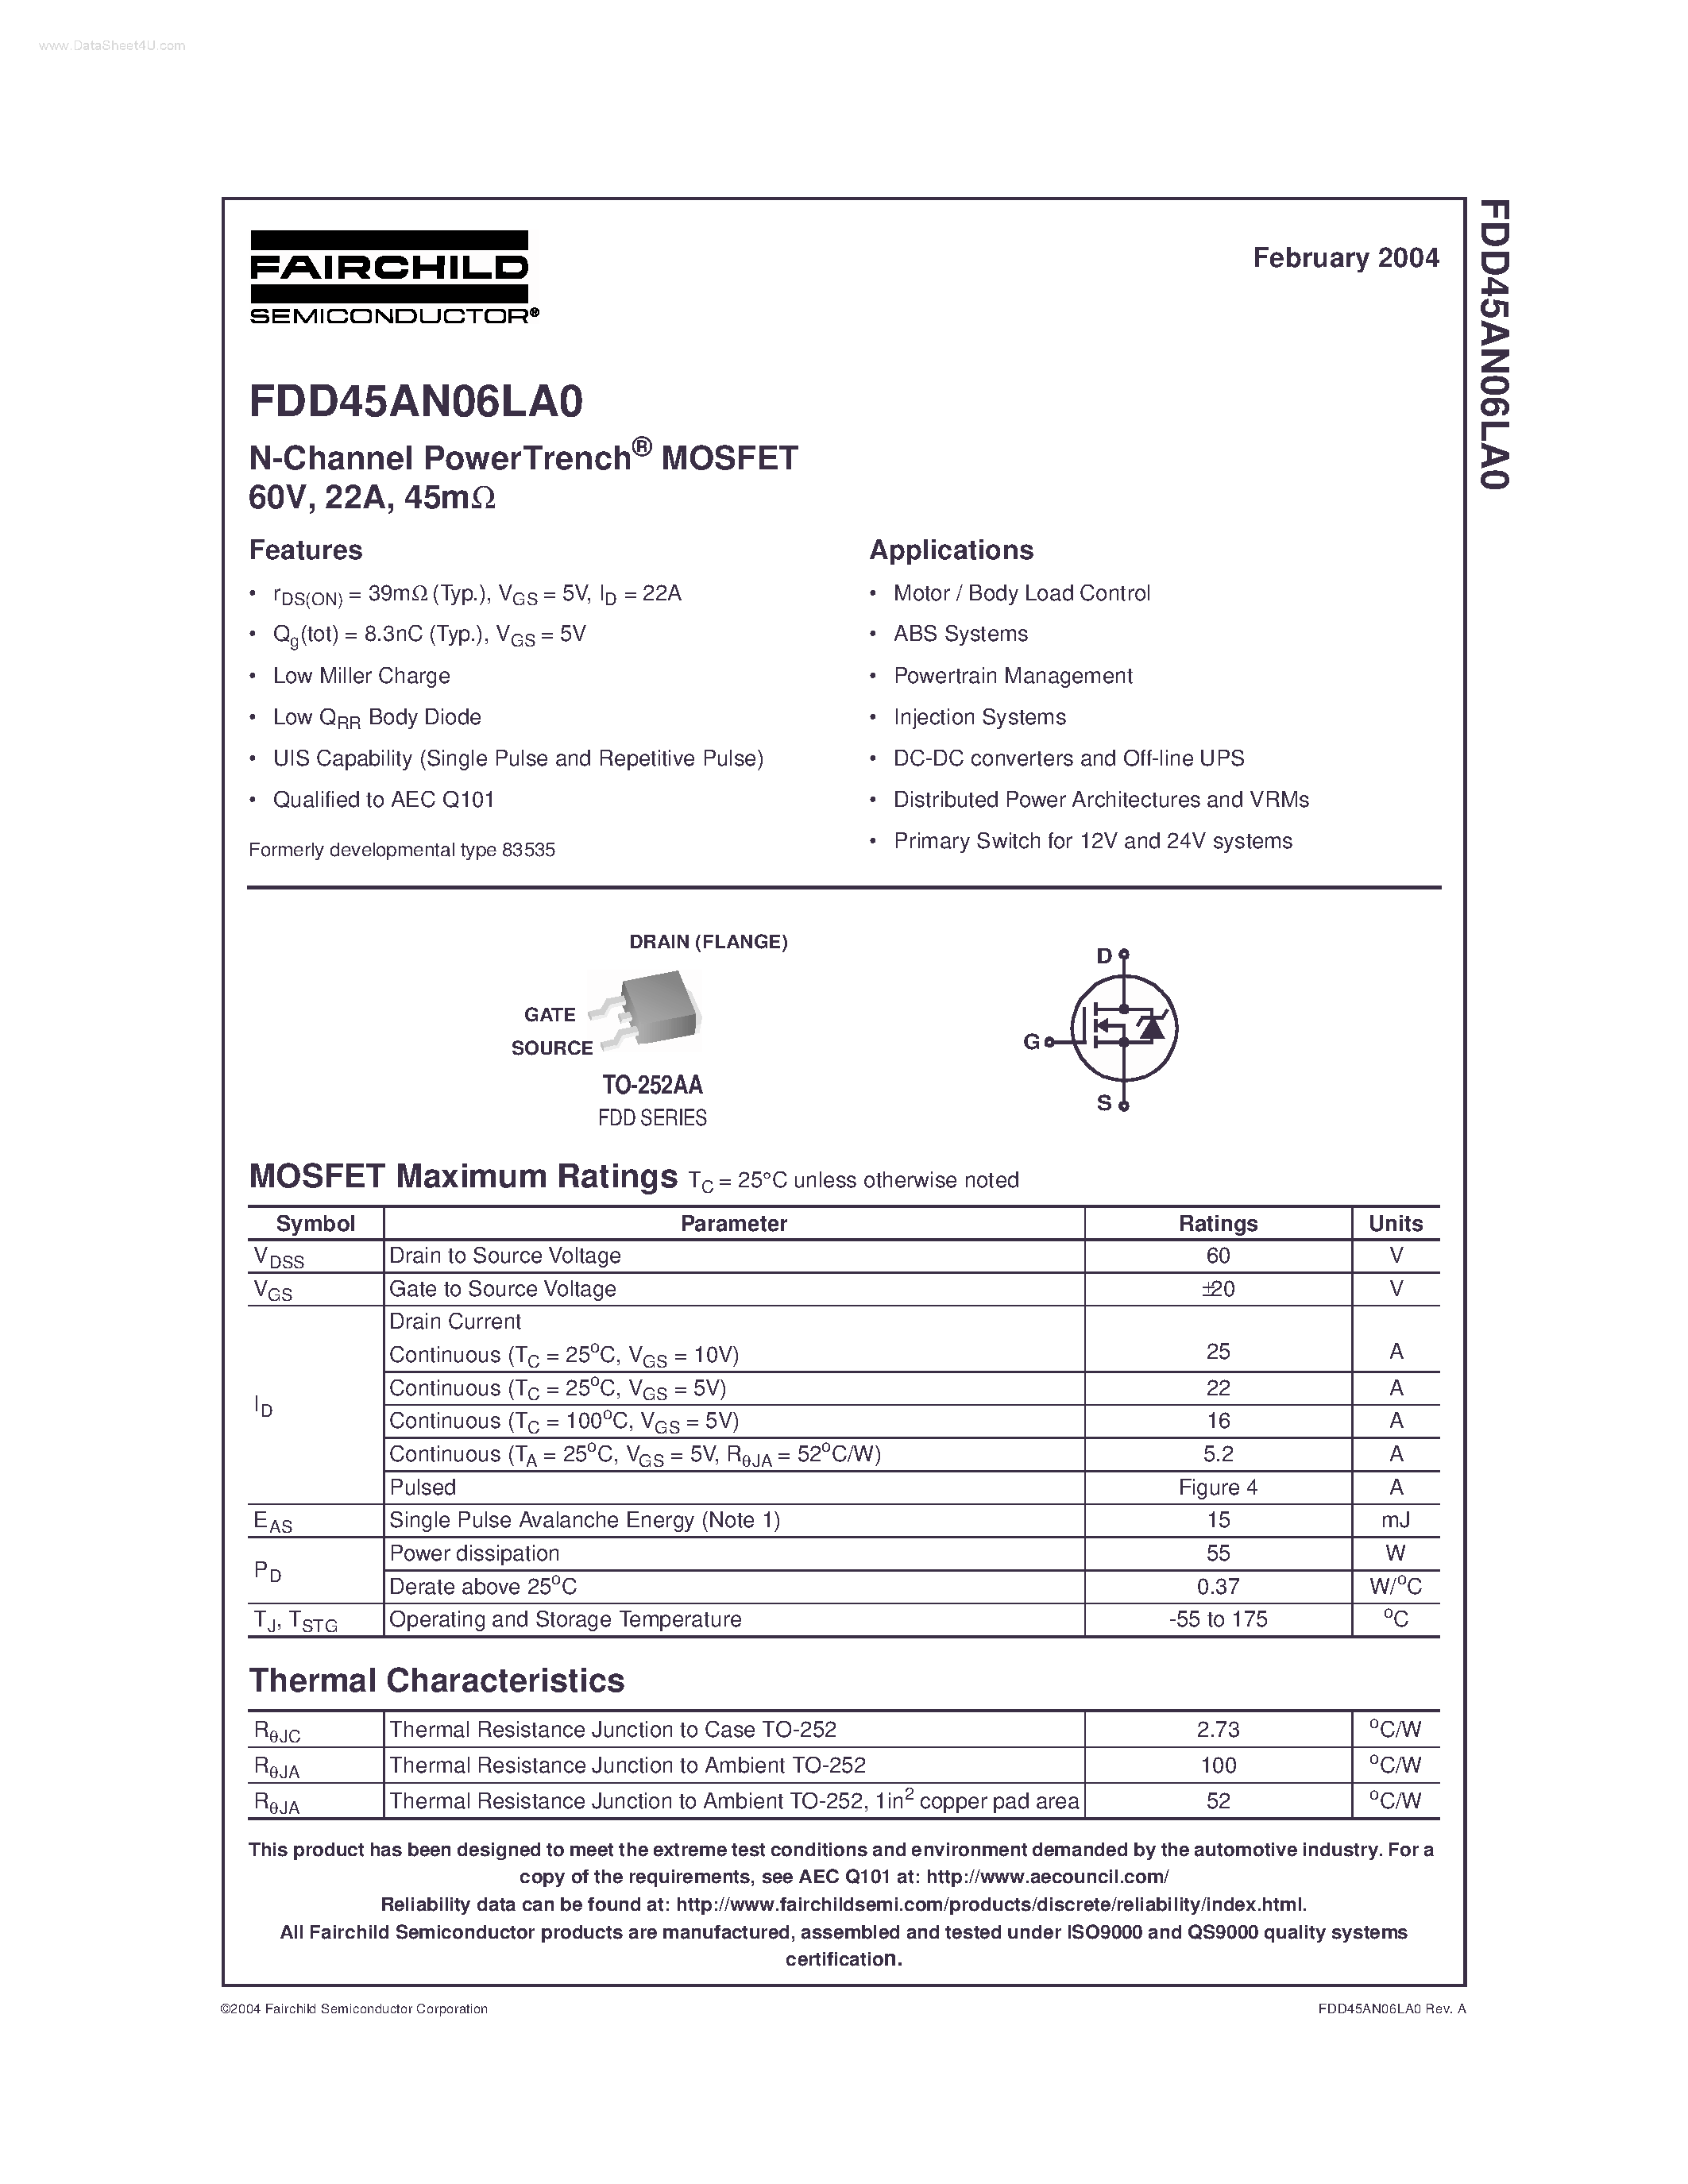 Даташит FDD45AN06LA0 - N-Channel PowerTrench MOSFET страница 1